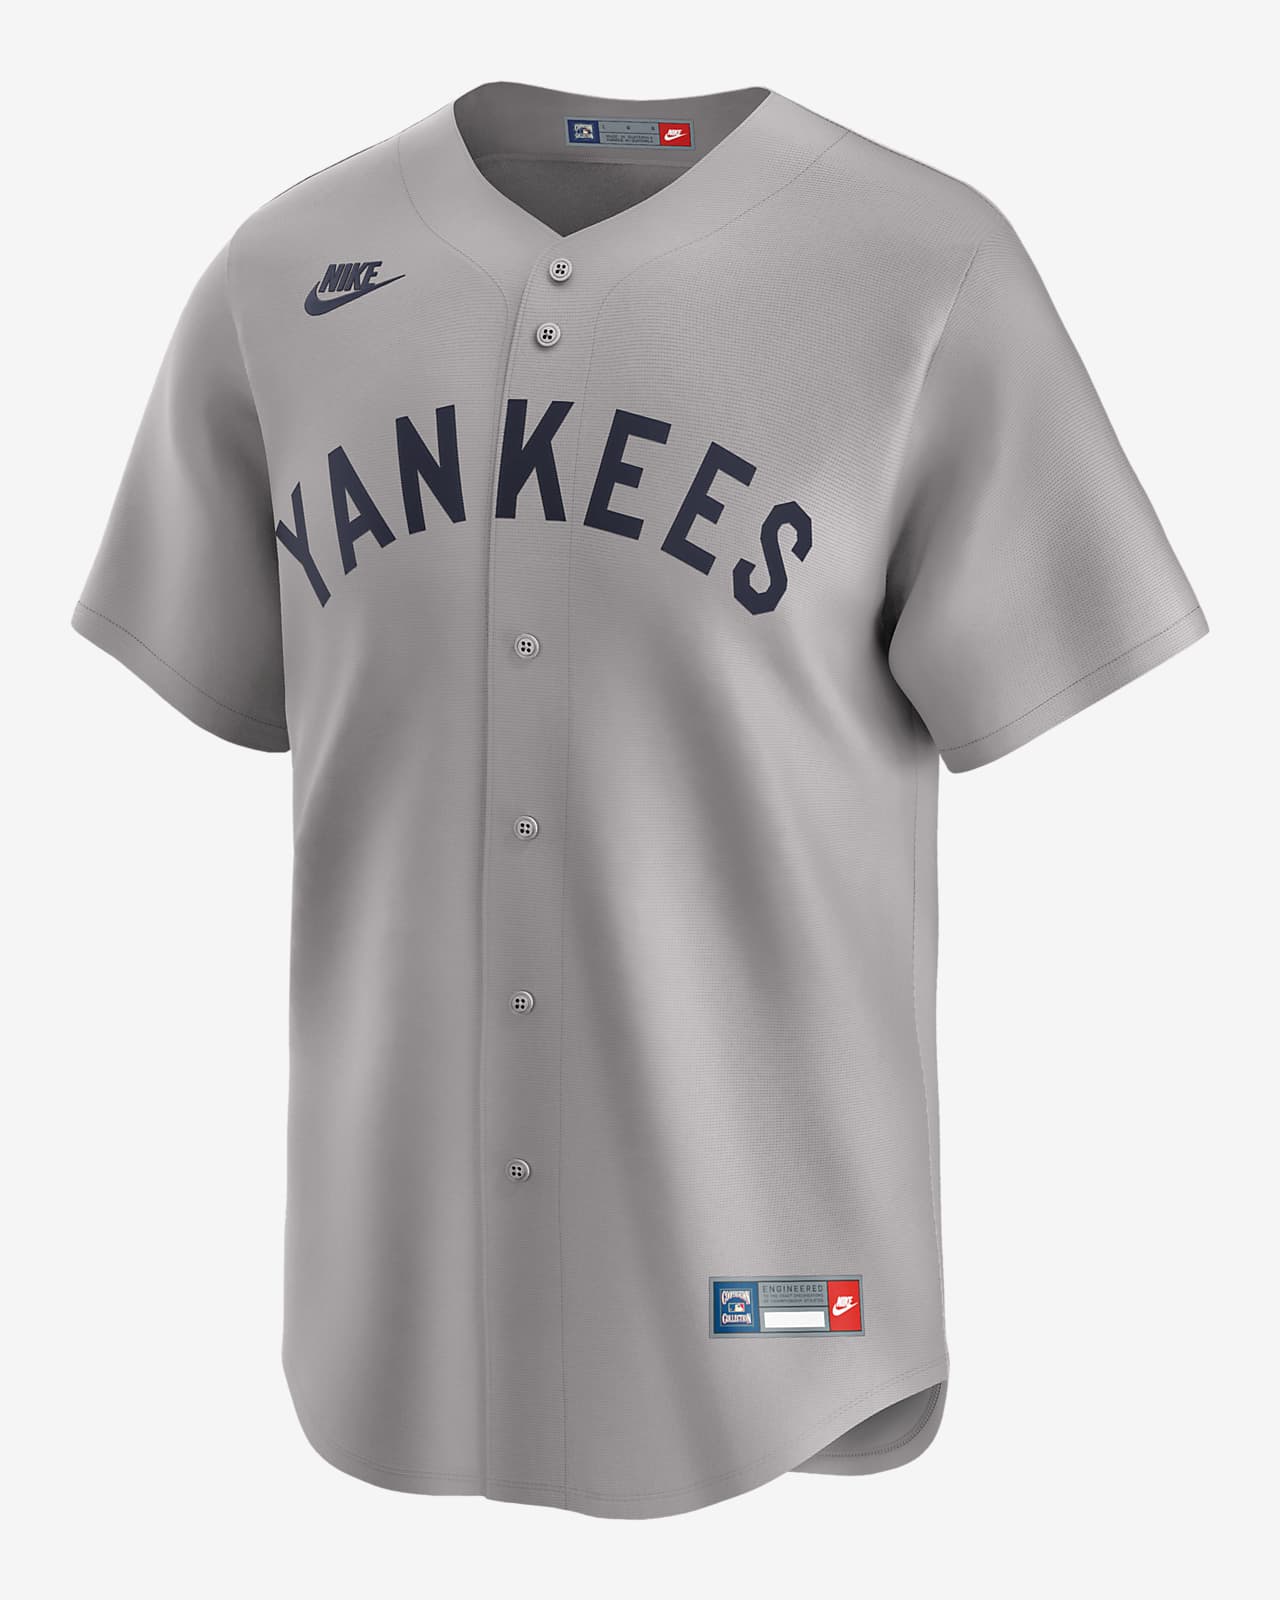 Jersey Nike Dri-FIT ADV de la MLB Limited para hombre Babe Ruth New York Yankees Cooperstown